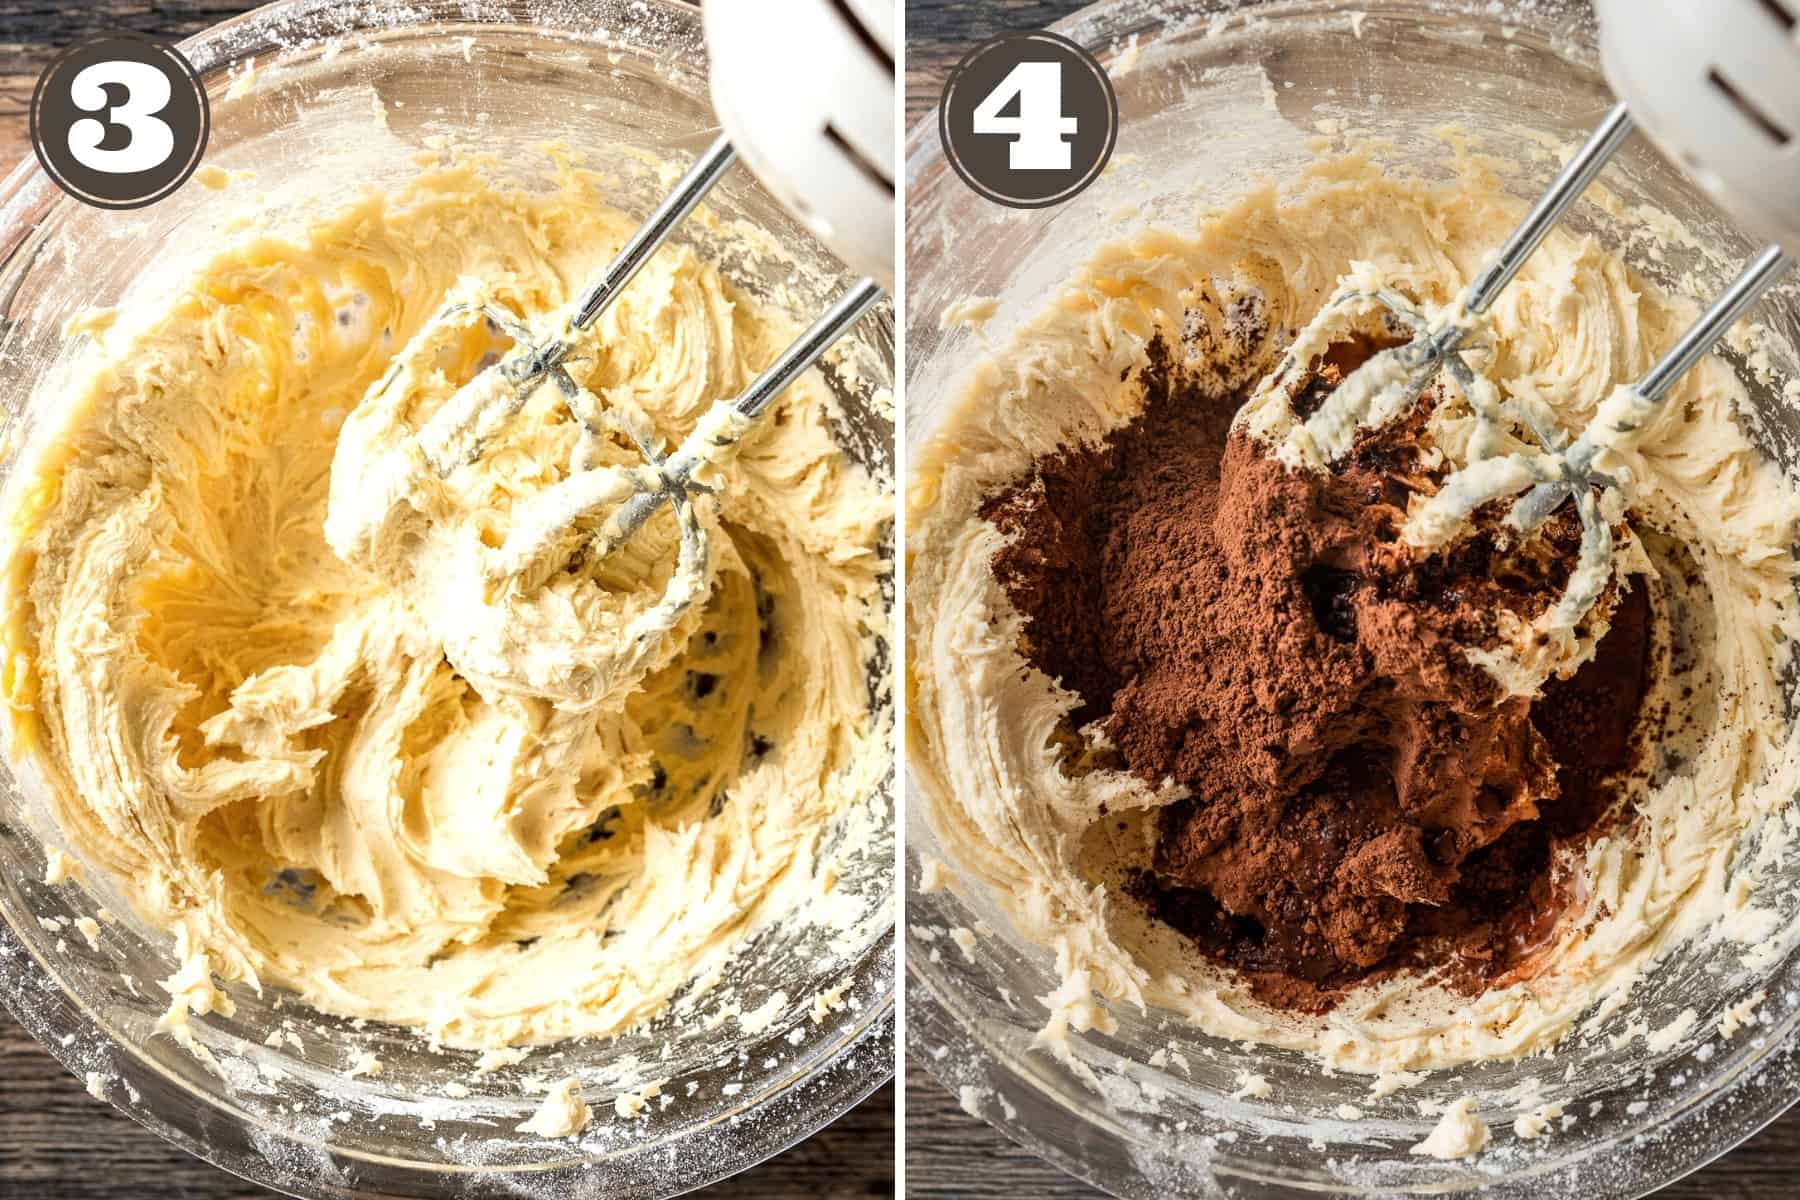 Side by side photos showing whipped american buttercream and adding of cocoa powder.